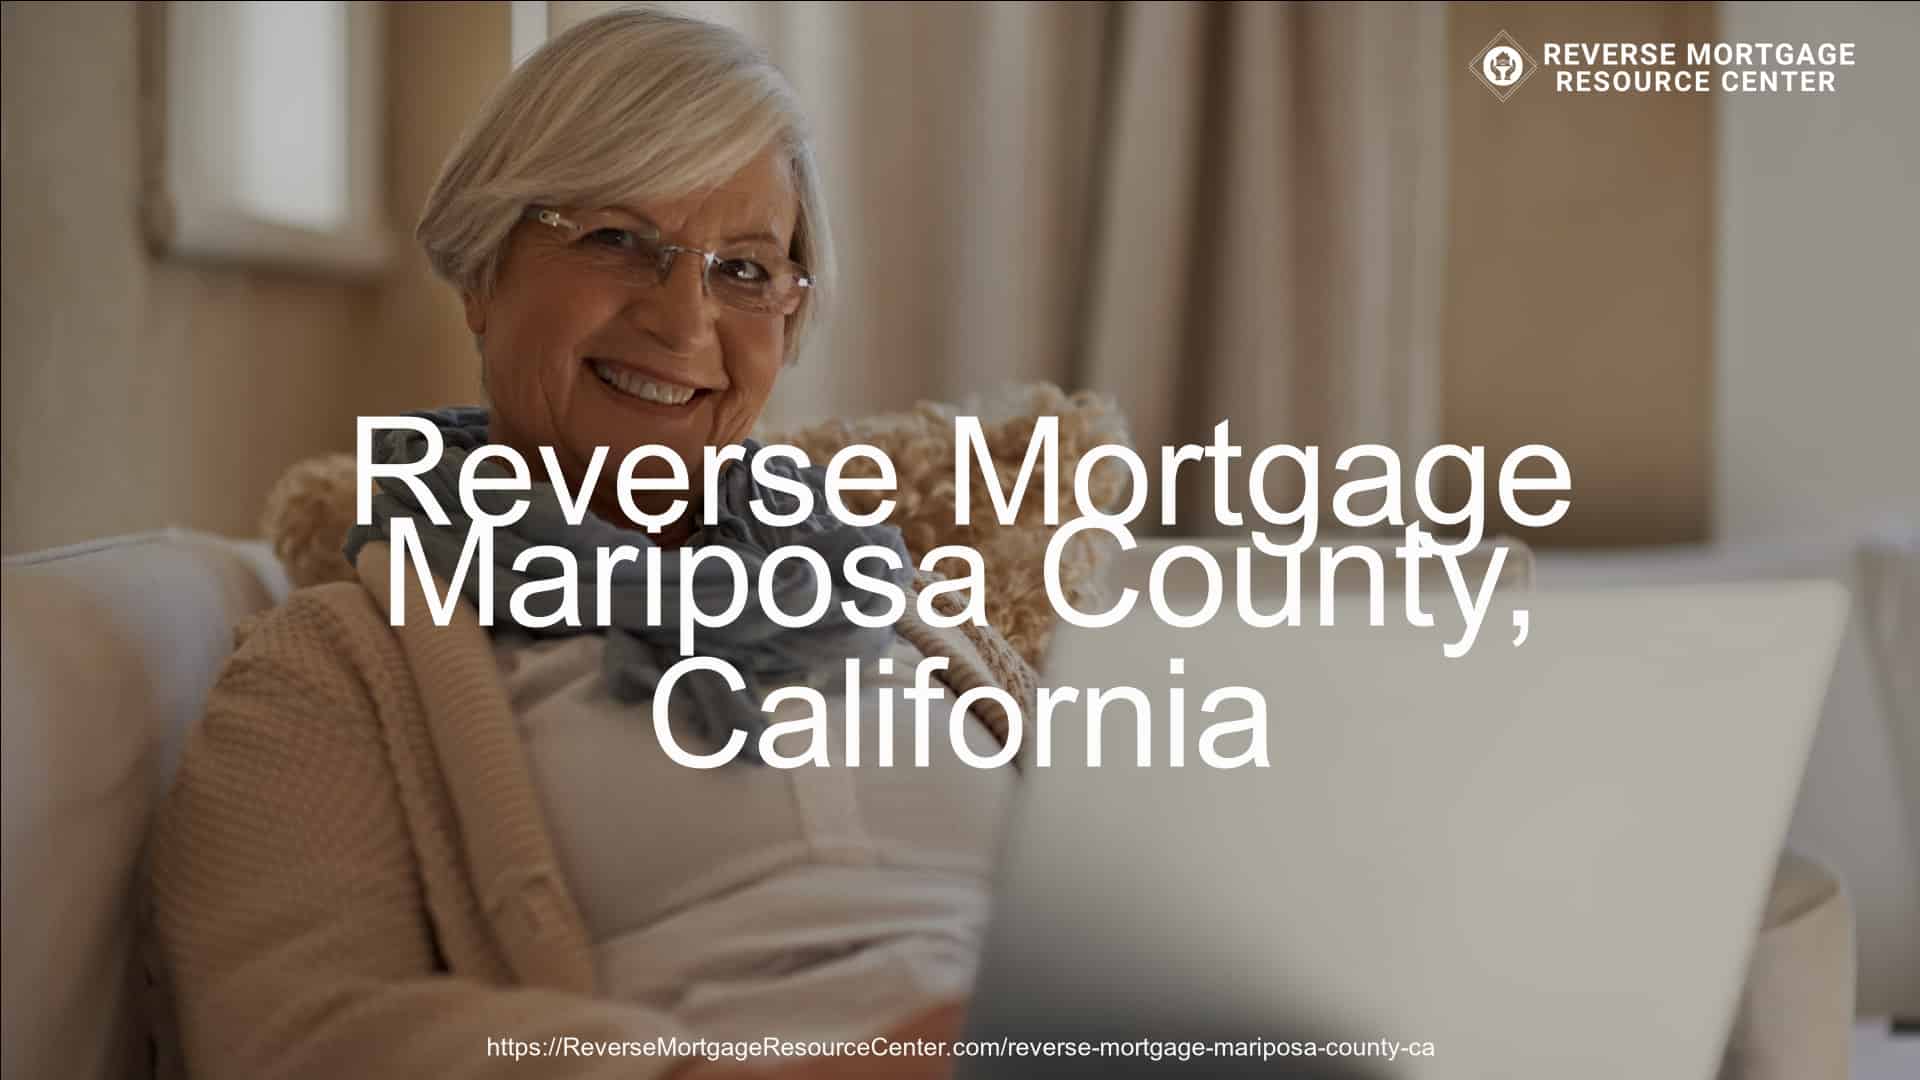 Reverse Mortgage in Mariposa County, CA